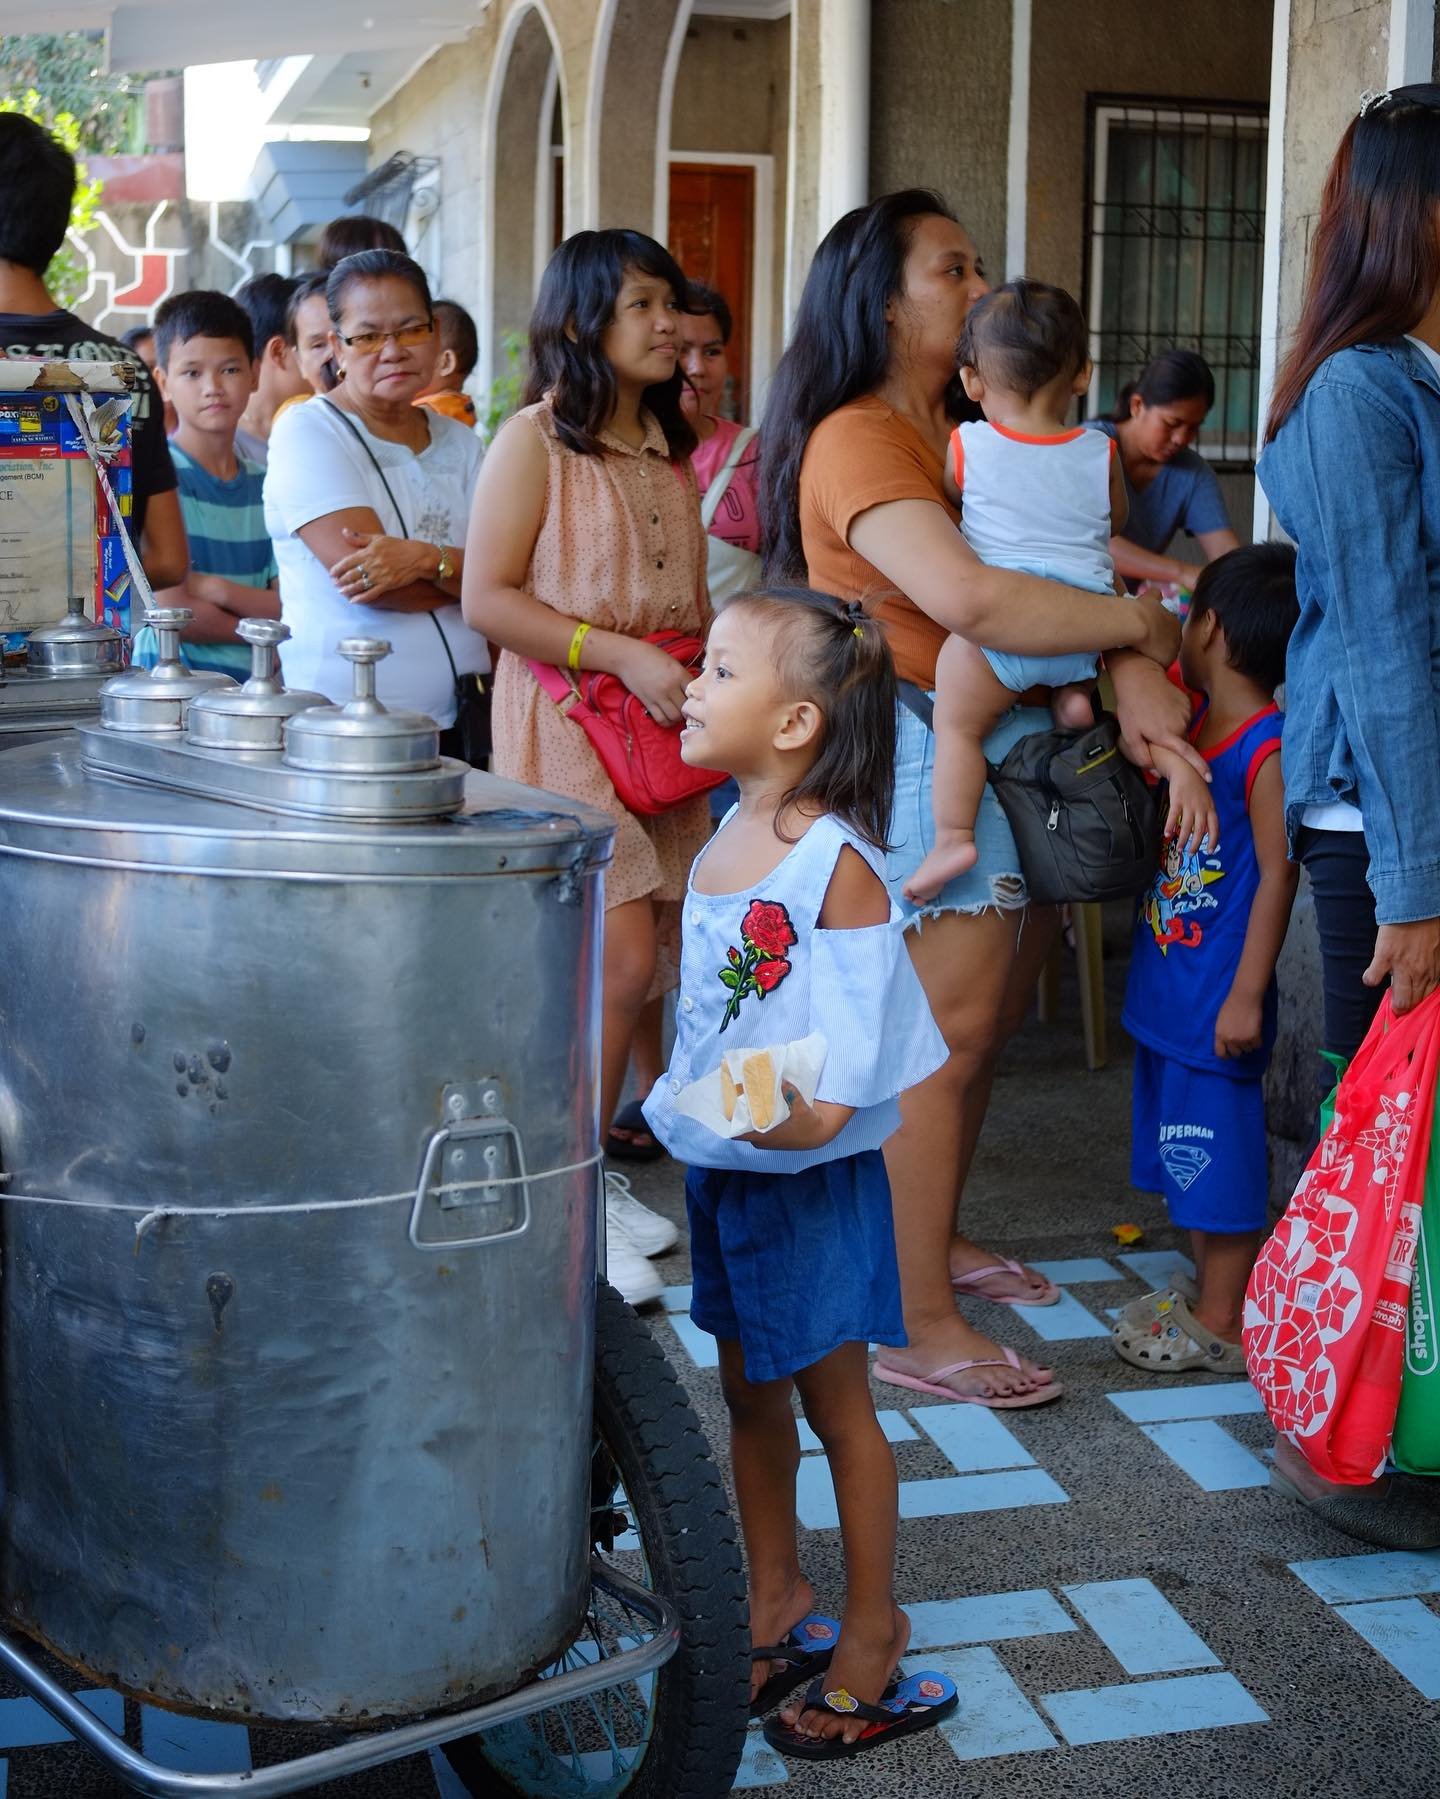 Travel dump 03: Christmas in the Philippines. Every year on Christmas Day, @kirstenbg176&rsquo;s family on her mothers side, the Baltazar&rsquo;s, hosts a soup kitchen for the families in the community in need from their late Lala&rsquo;s home in Cai